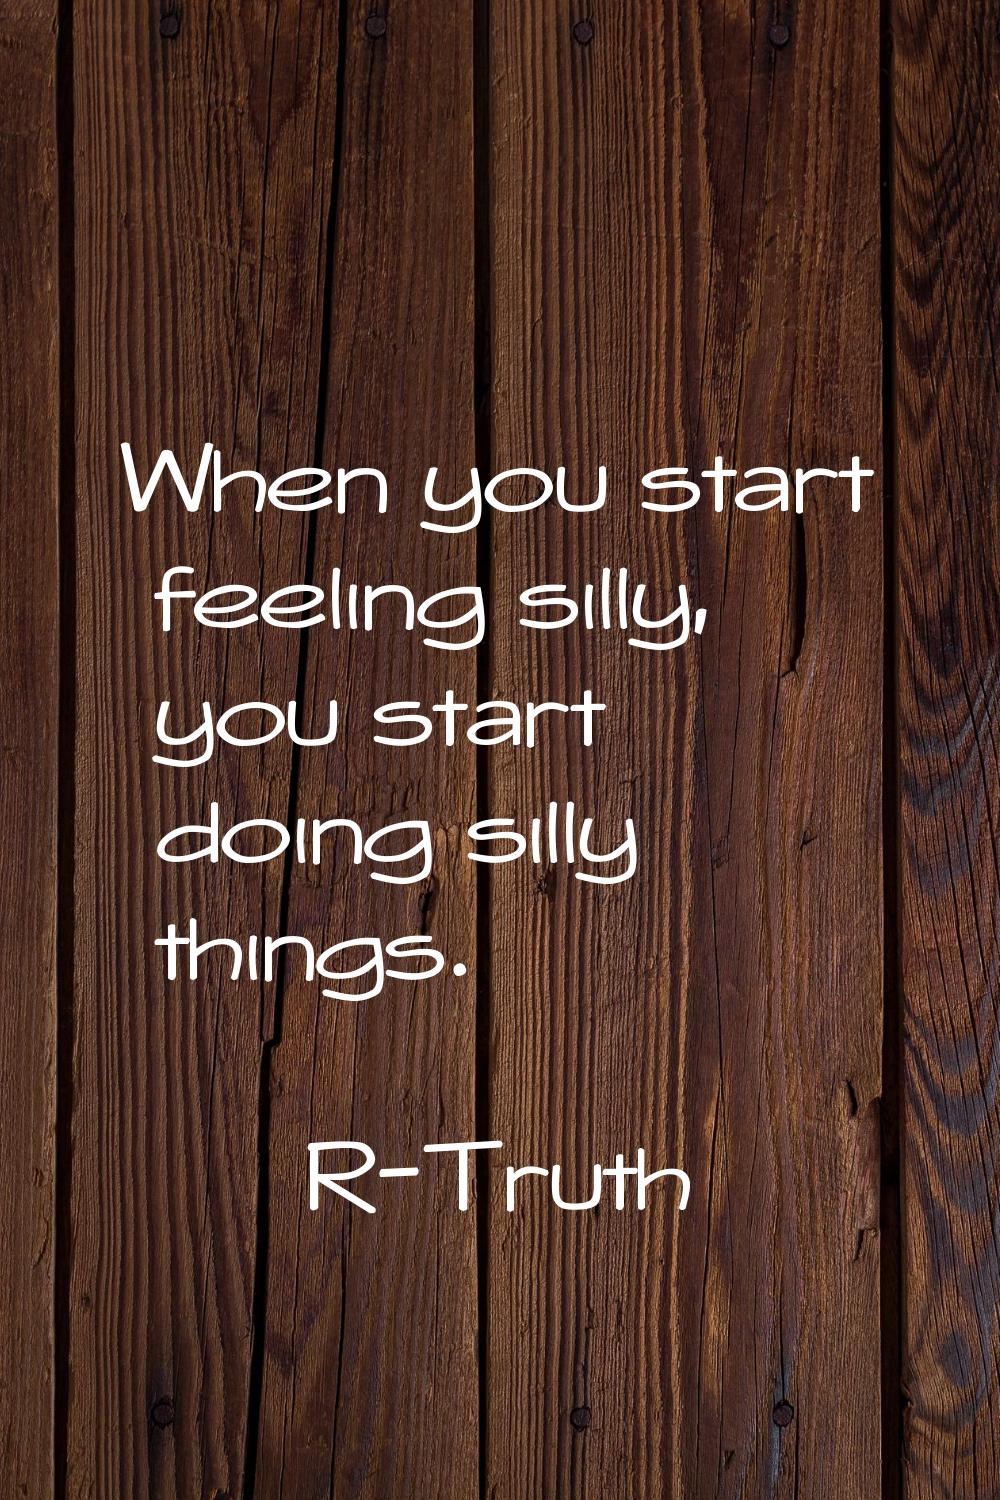 When you start feeling silly, you start doing silly things.